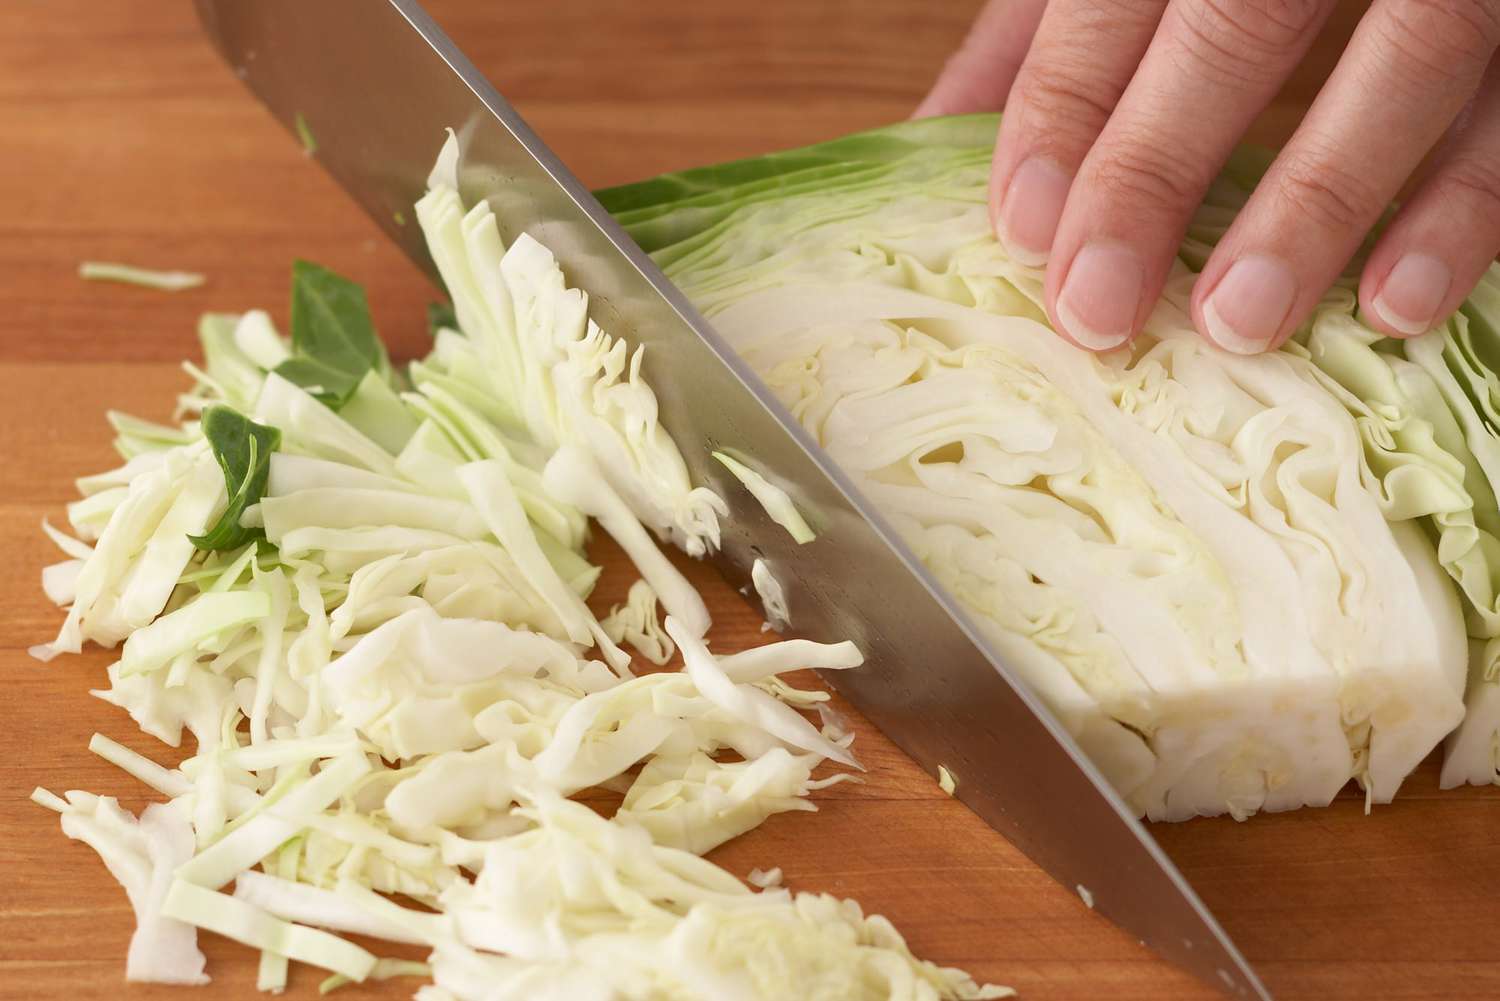 person holding knife slicing cabbage wedge into thin shreds